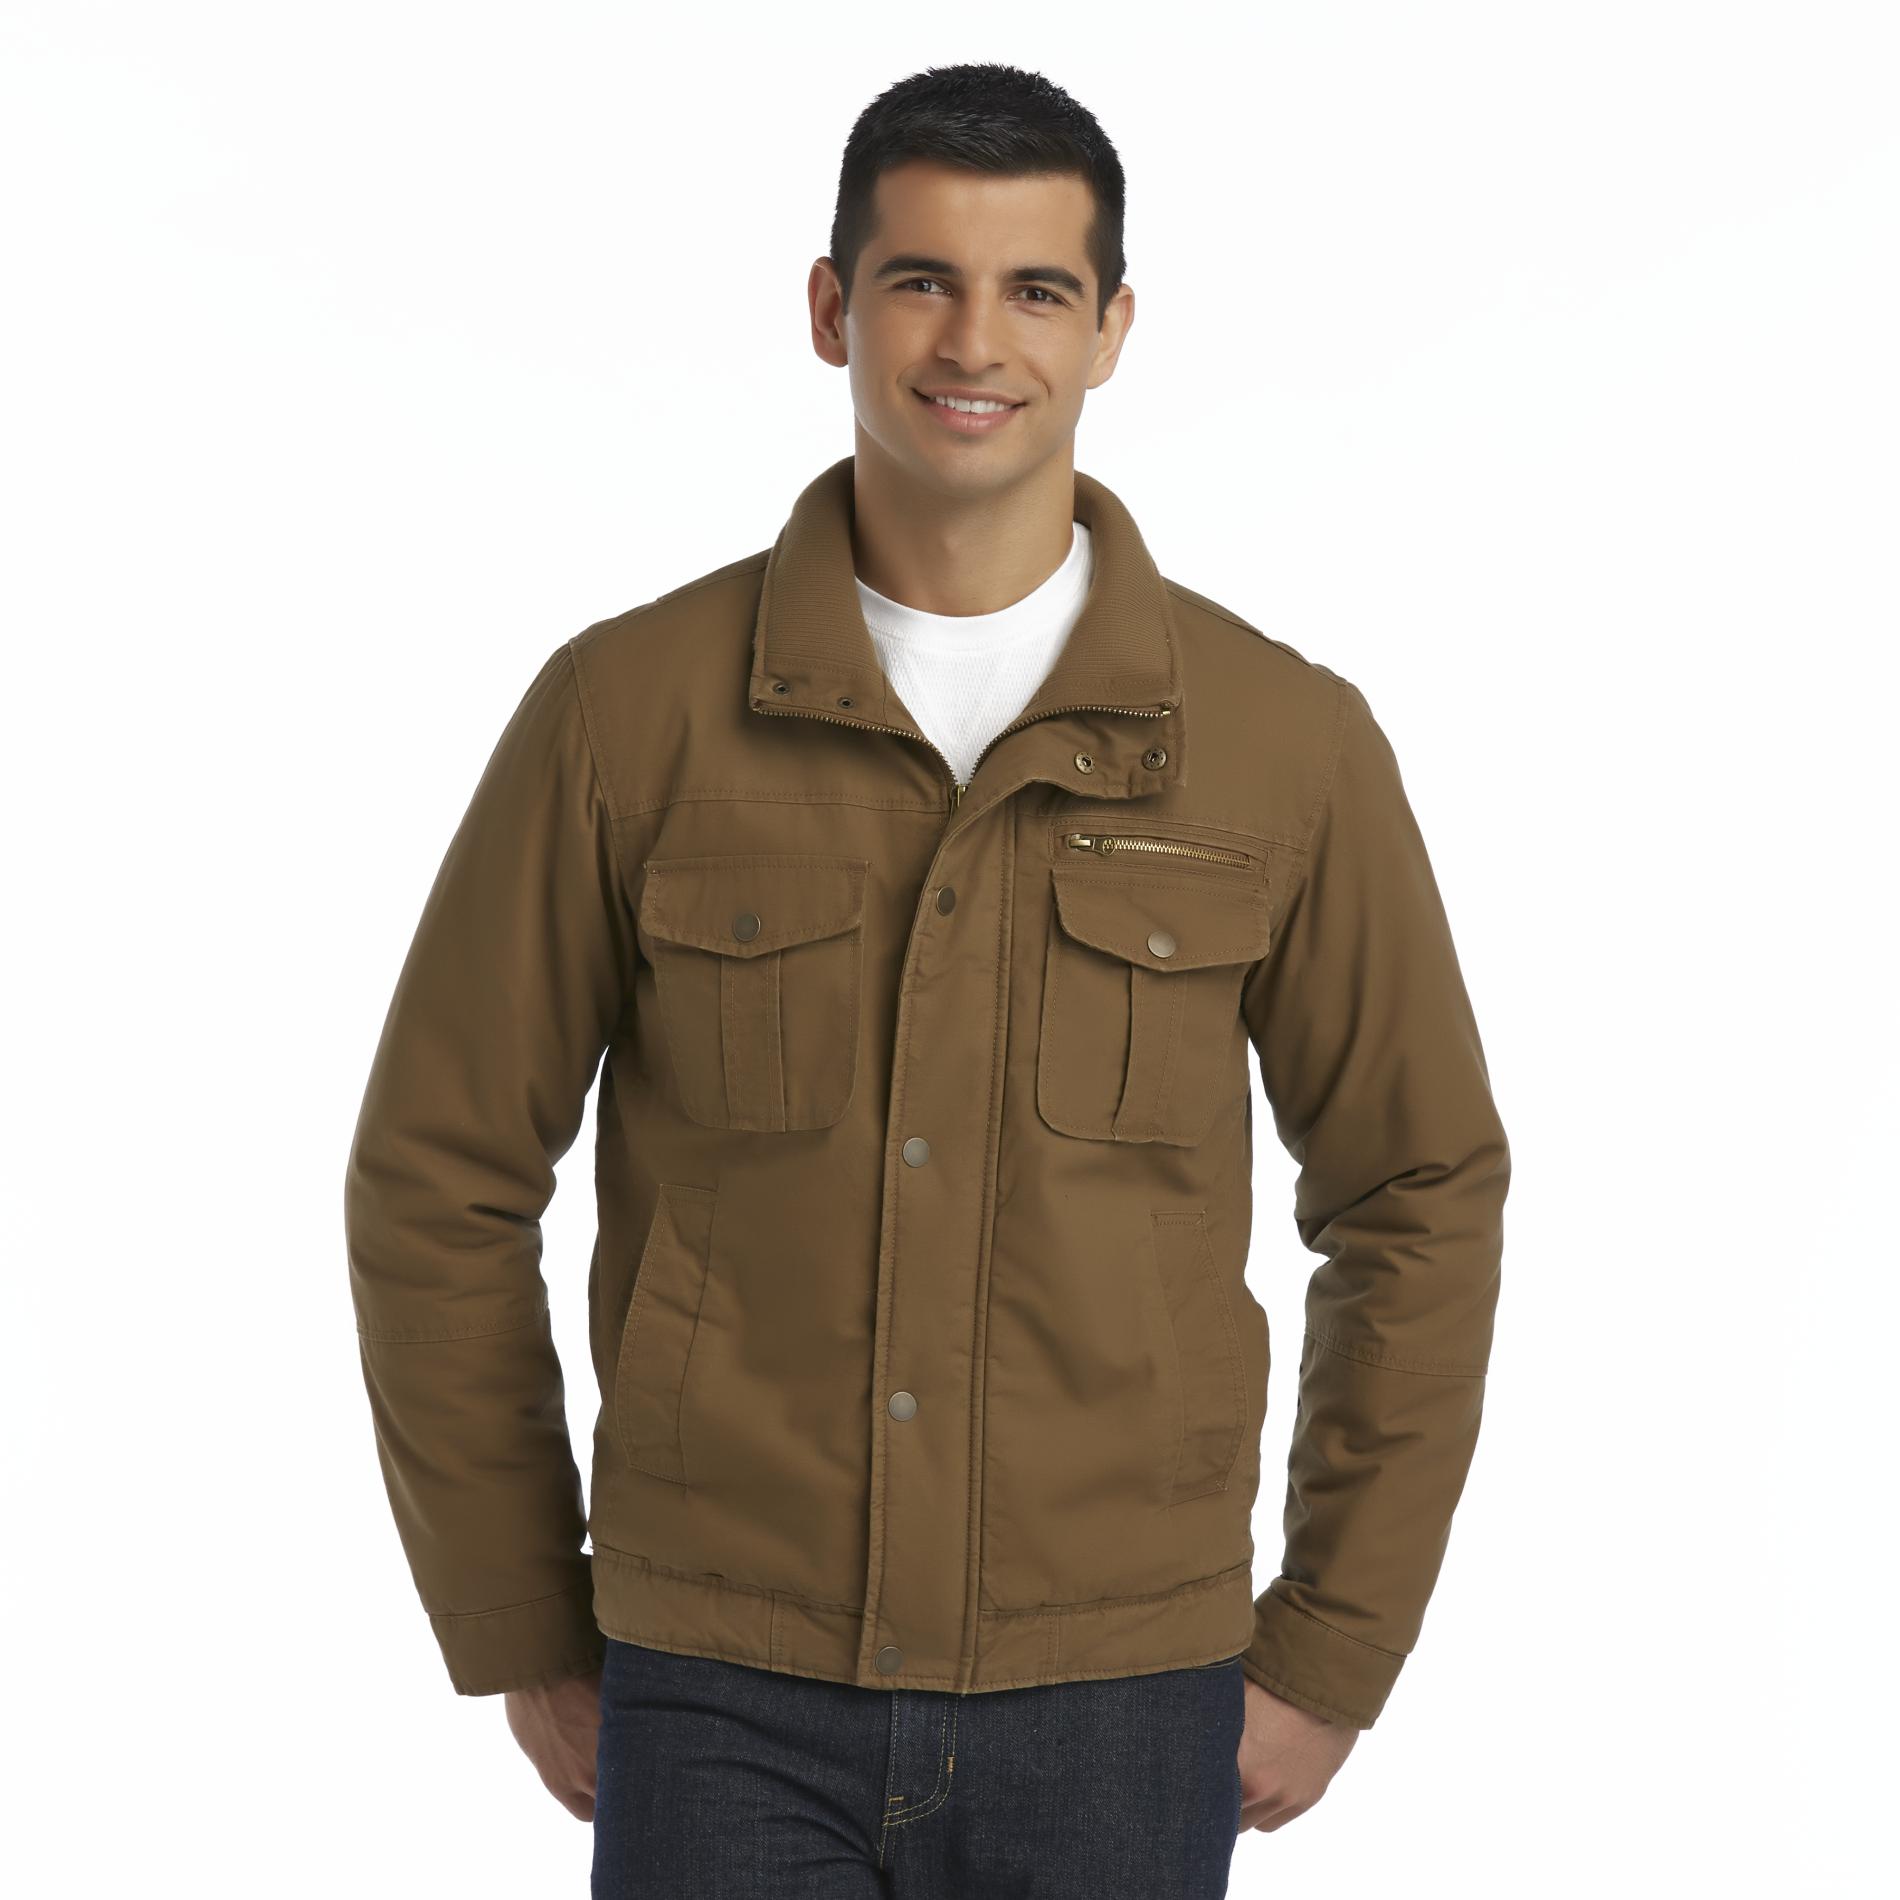 Route 66 Men’s Sherpa Lined Canvas Jacket—$27.99! (Was $69.99)